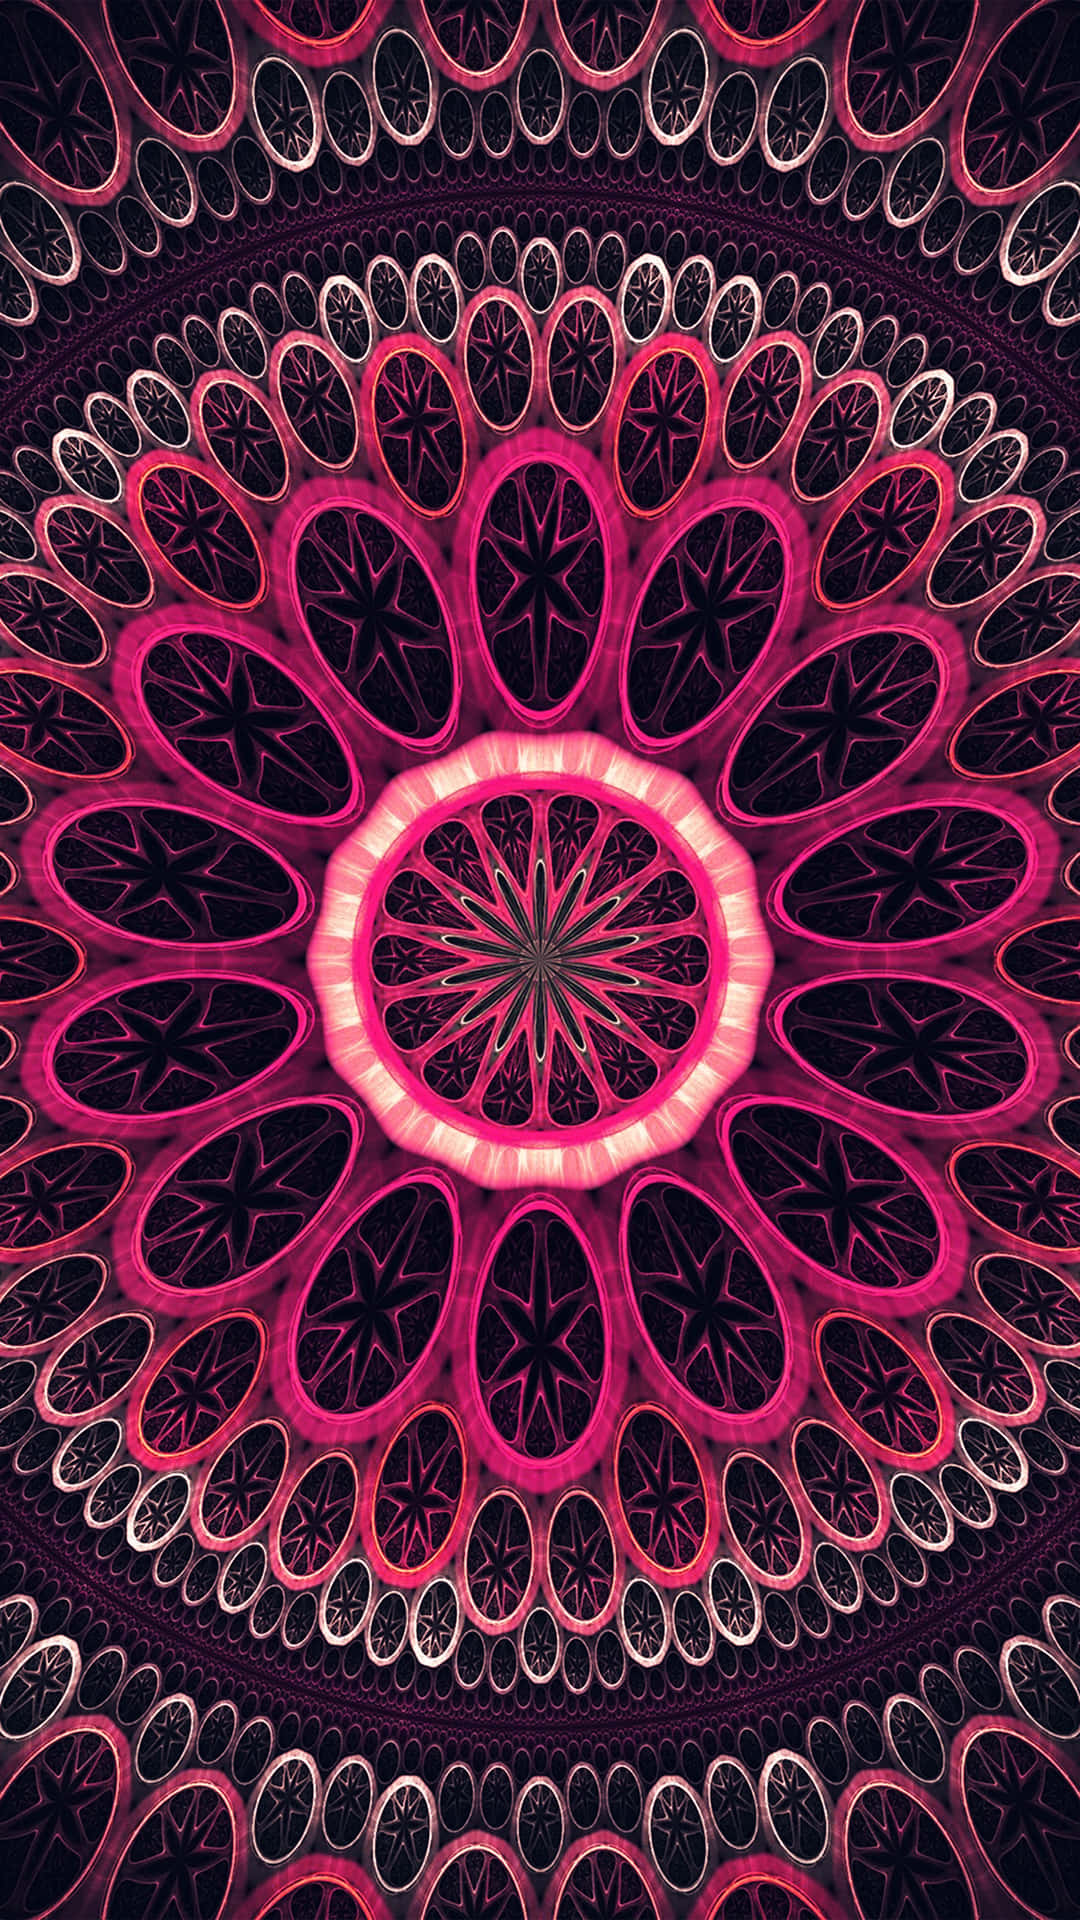 Caption: A psychedelic exploration of colors and shapes in motion. Wallpaper